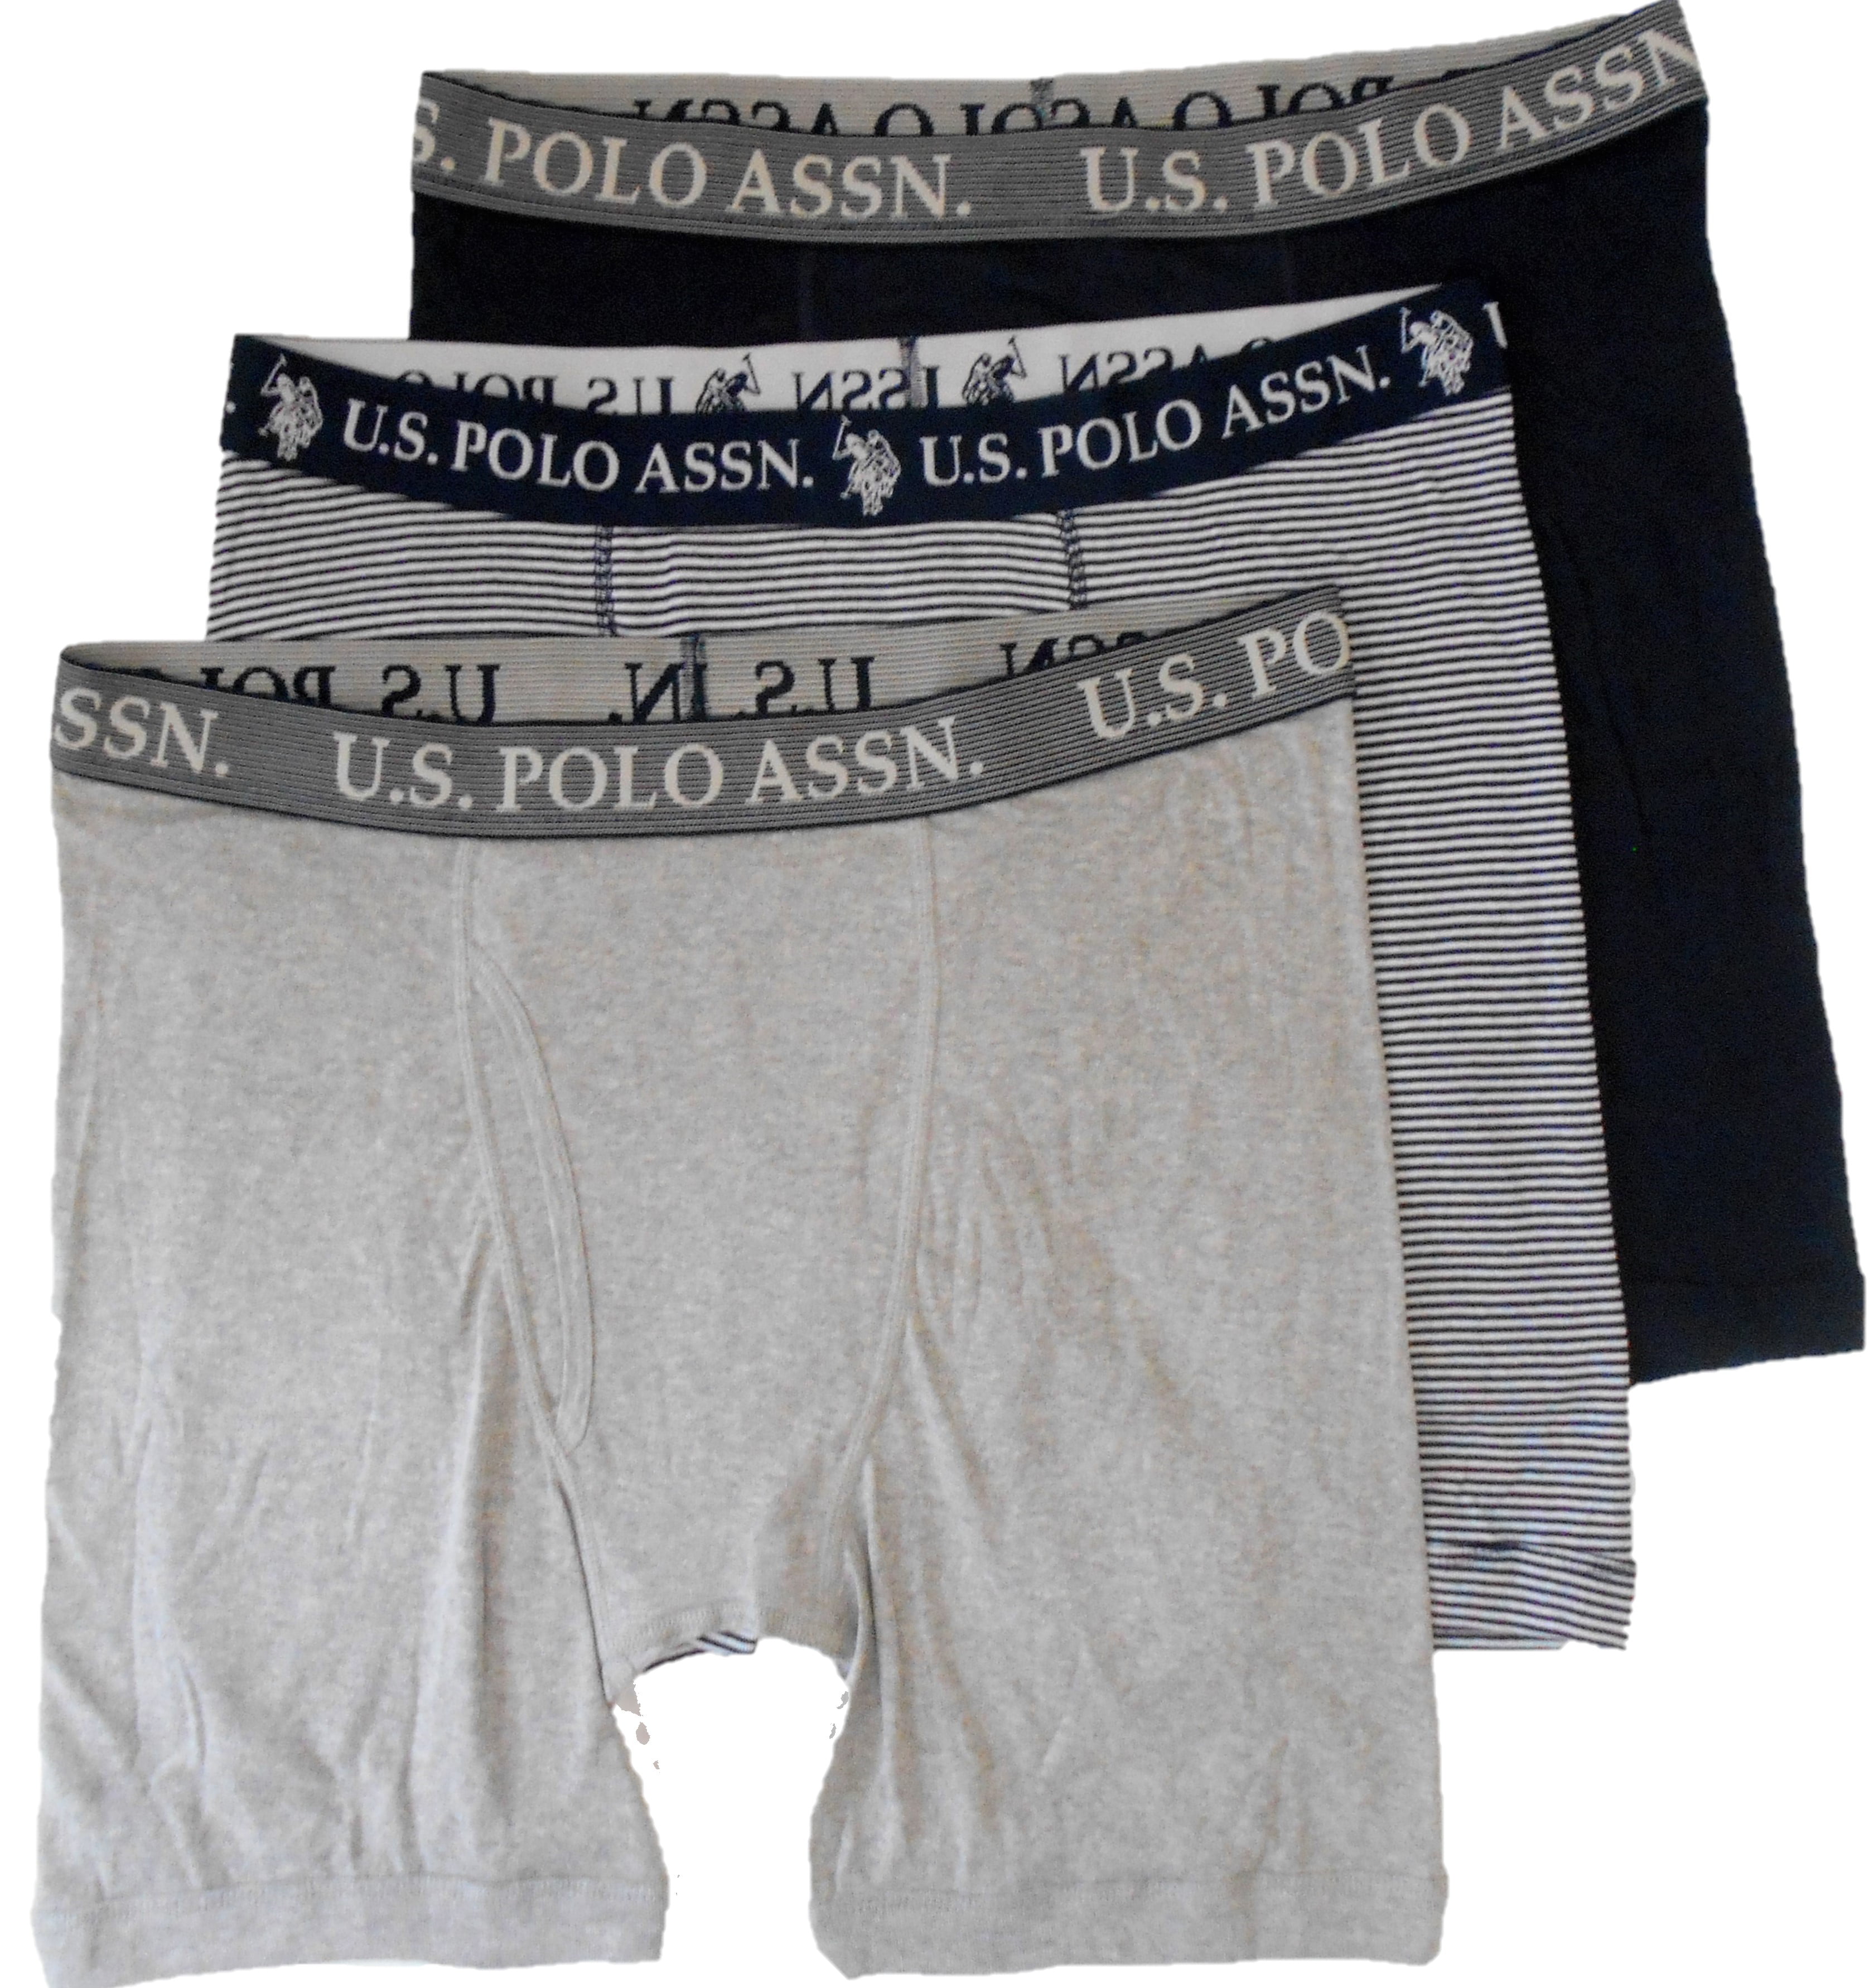 PACK FLY BOXER BRIEF - Walmart 